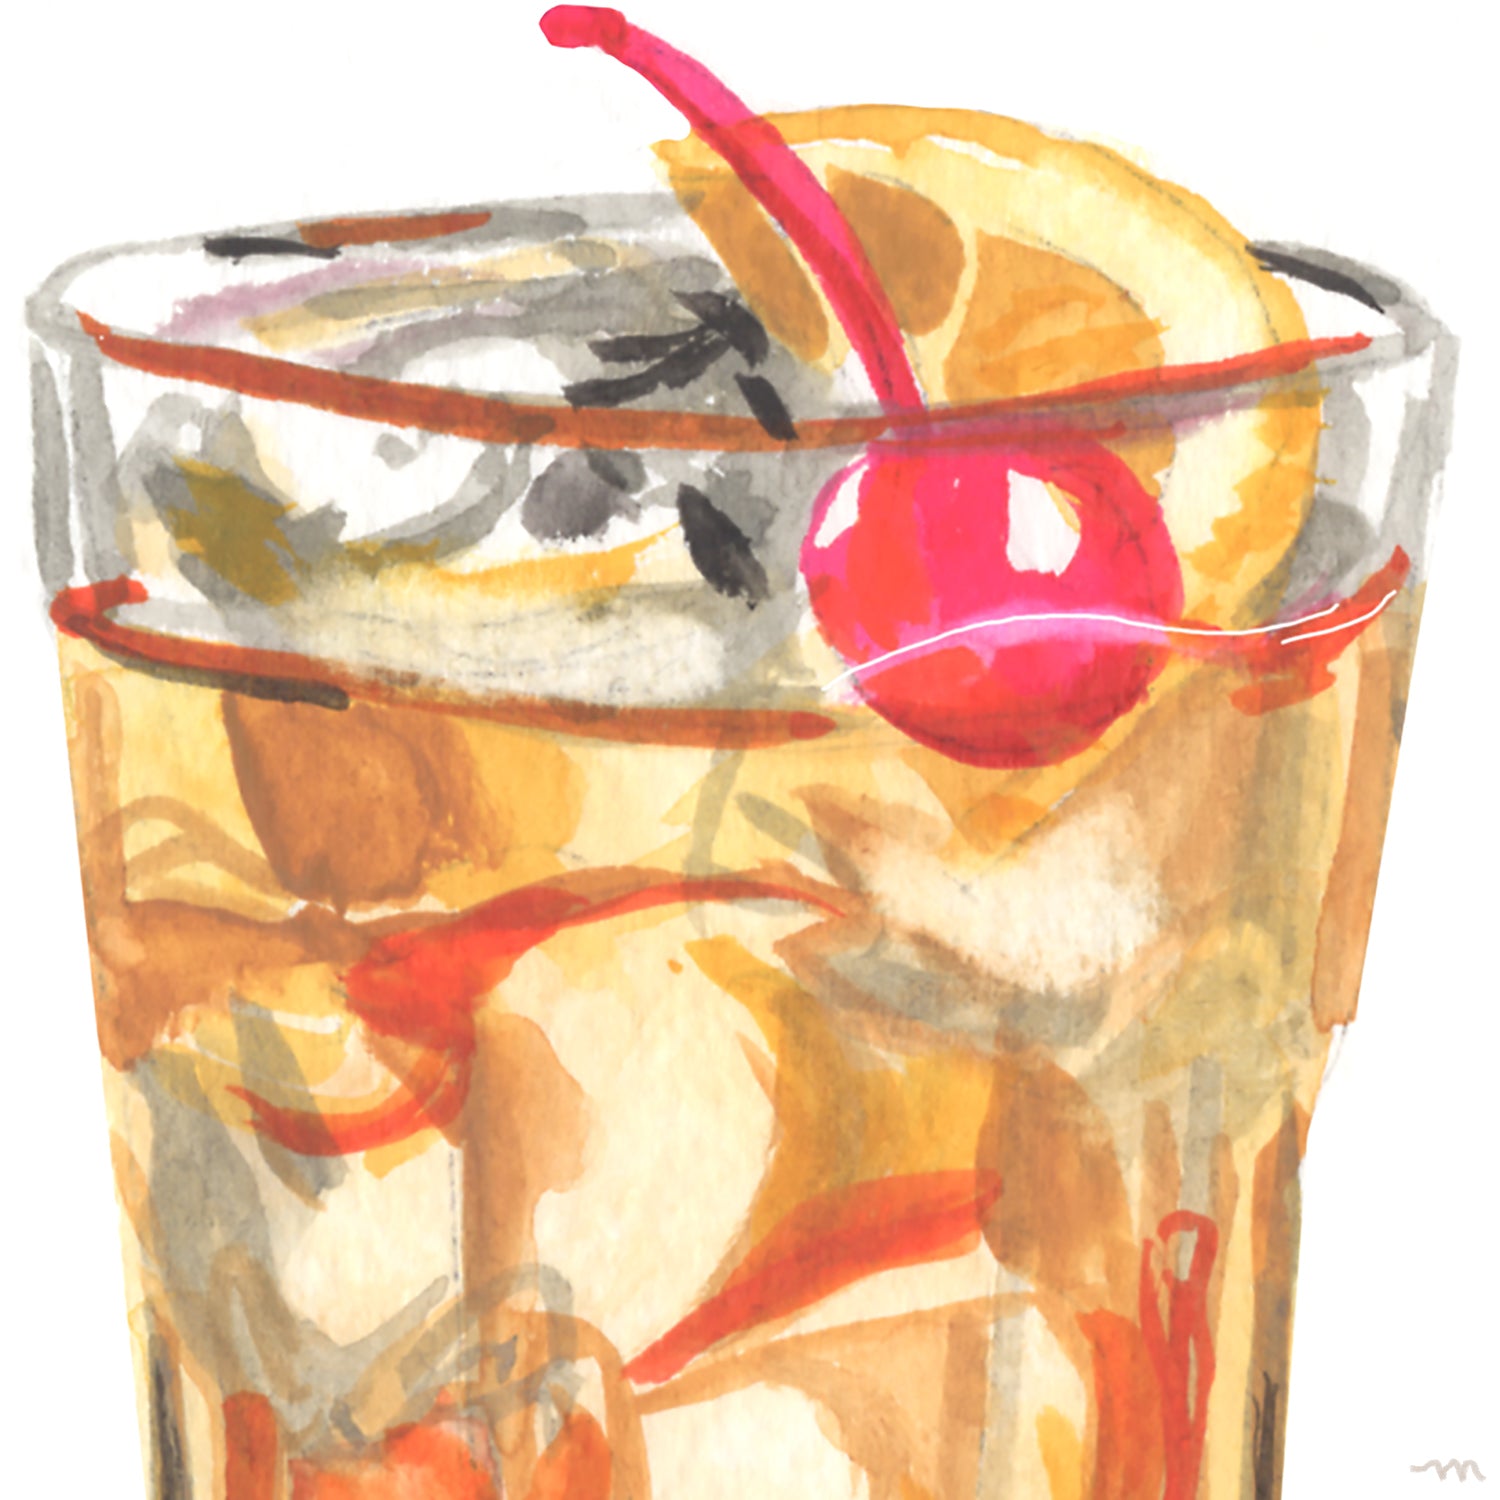 Old Fashioned Cocktail Art Print